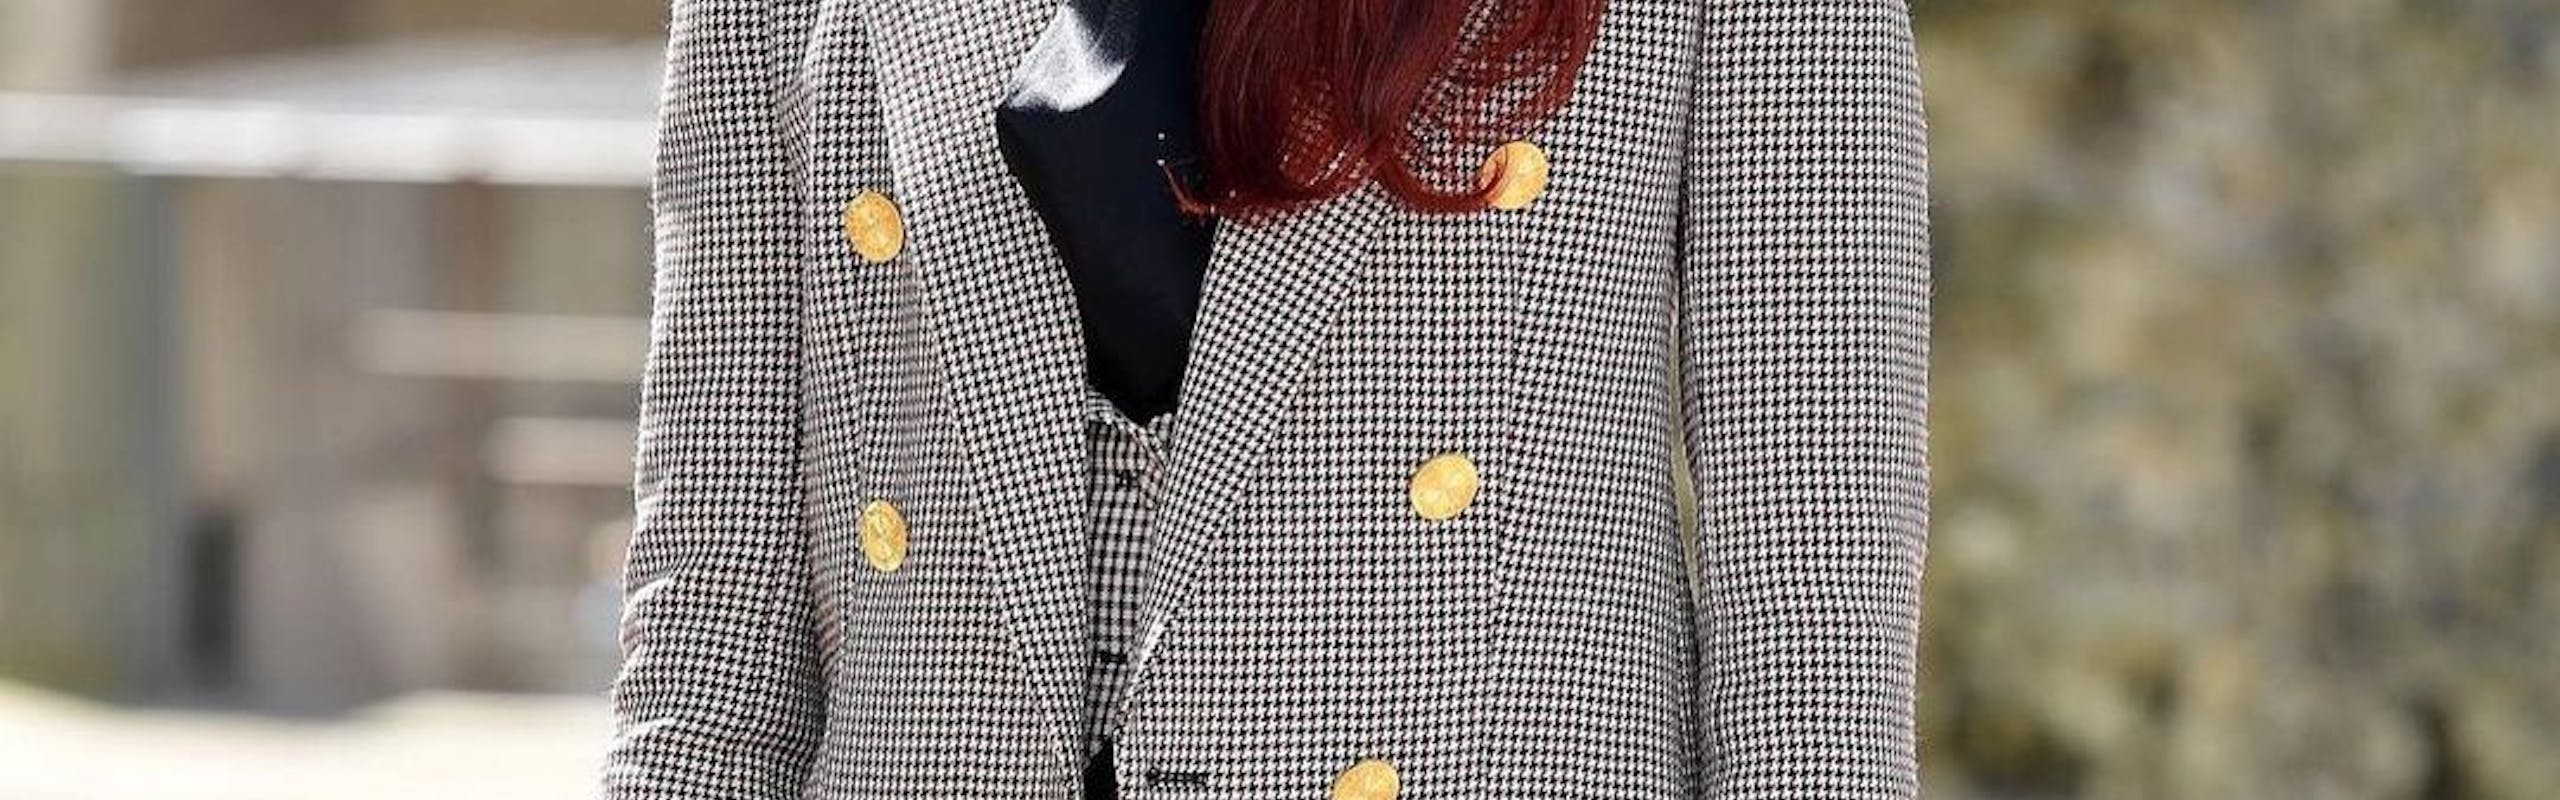 Zendaya in a grey houndstooth blazer and red hair.